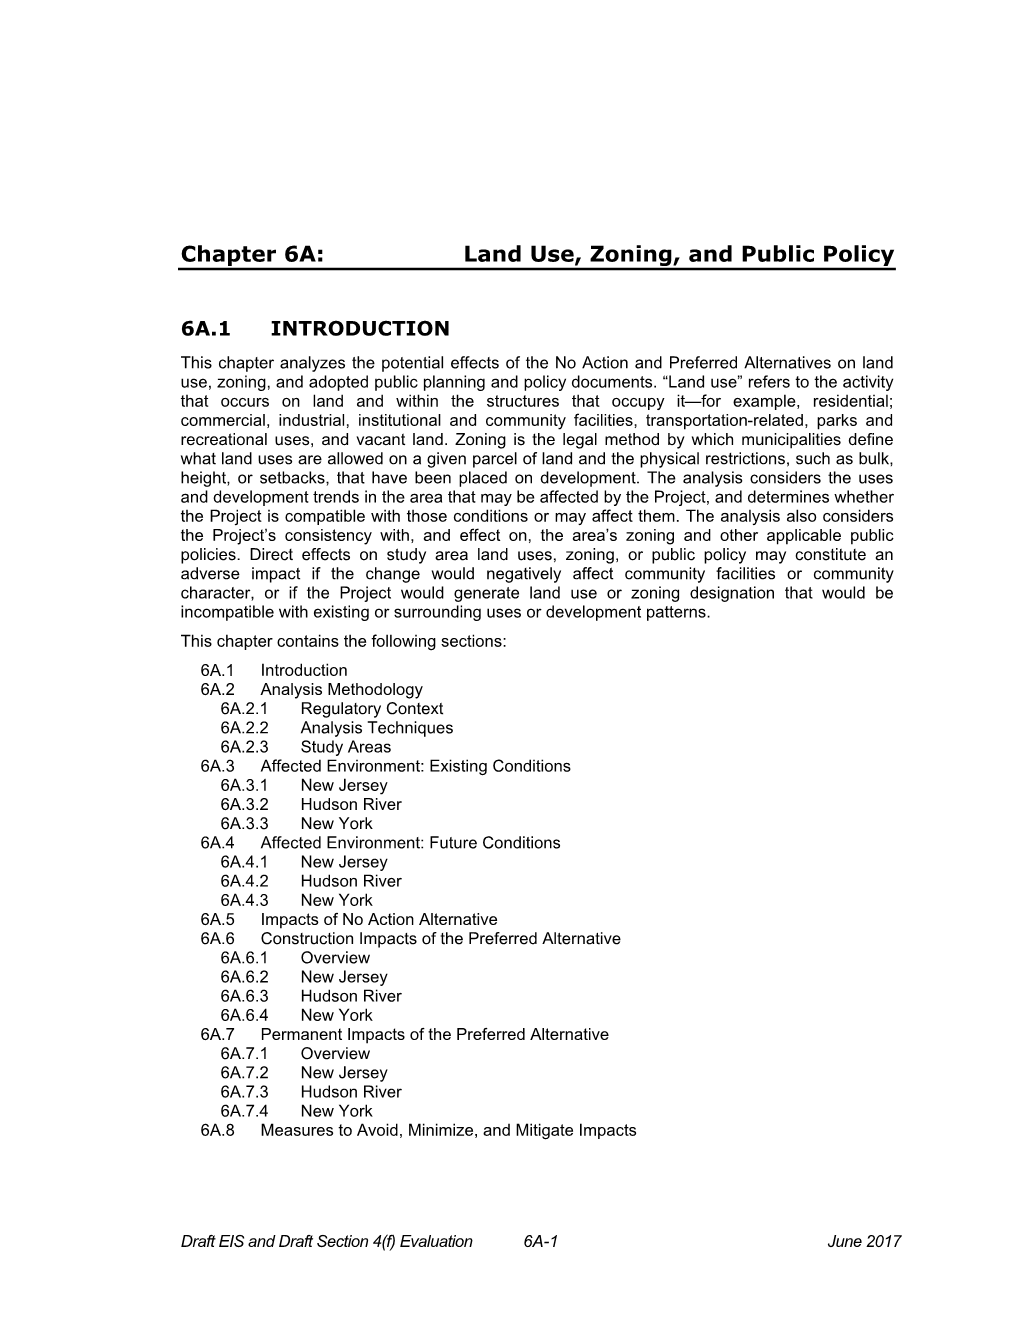 Chapter 6A: Land Use, Zoning, and Public Policy